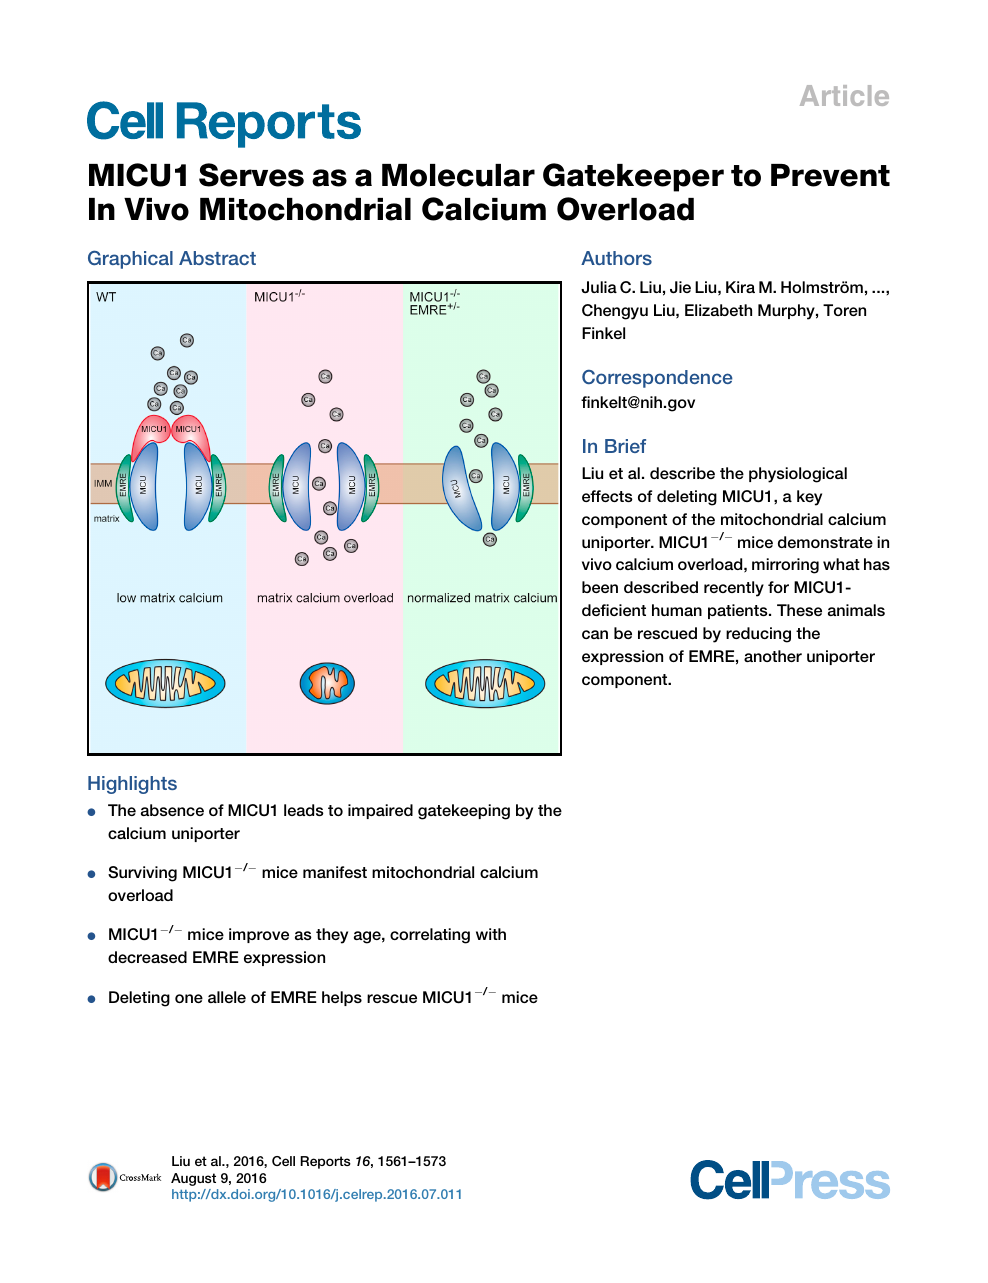 Micu1 Serves As A Molecular Gatekeeper To Prevent In Vivo Mitochondrial Calcium Overload Topic Of Research Paper In Biological Sciences Download Scholarly Article Pdf And Read For Free On Cyberleninka Open